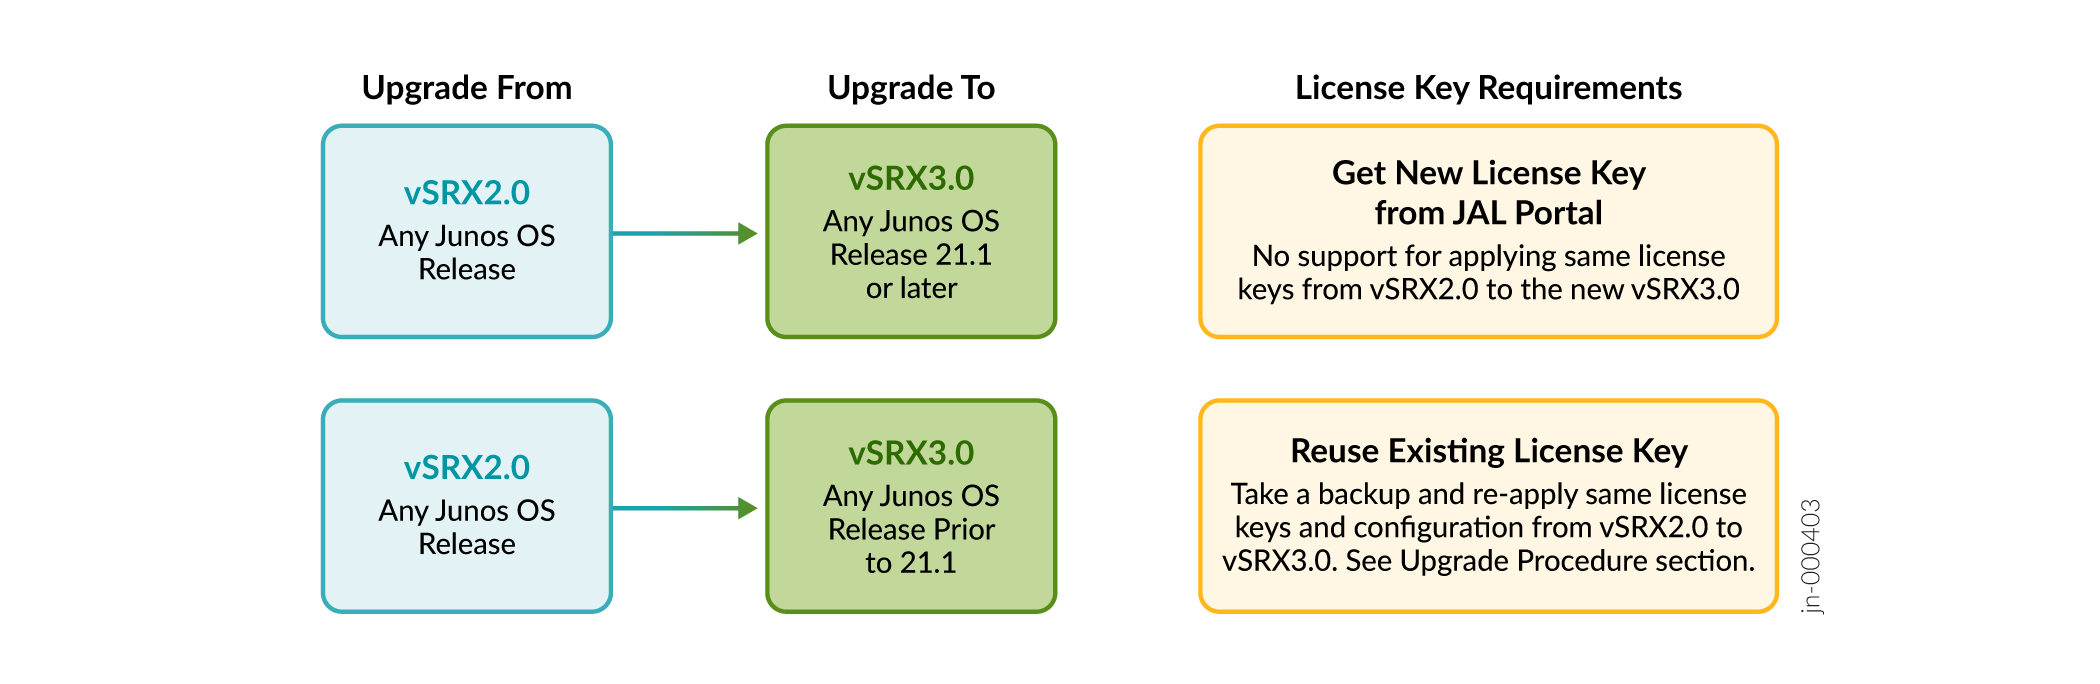 License Requirements for vSRX3.0